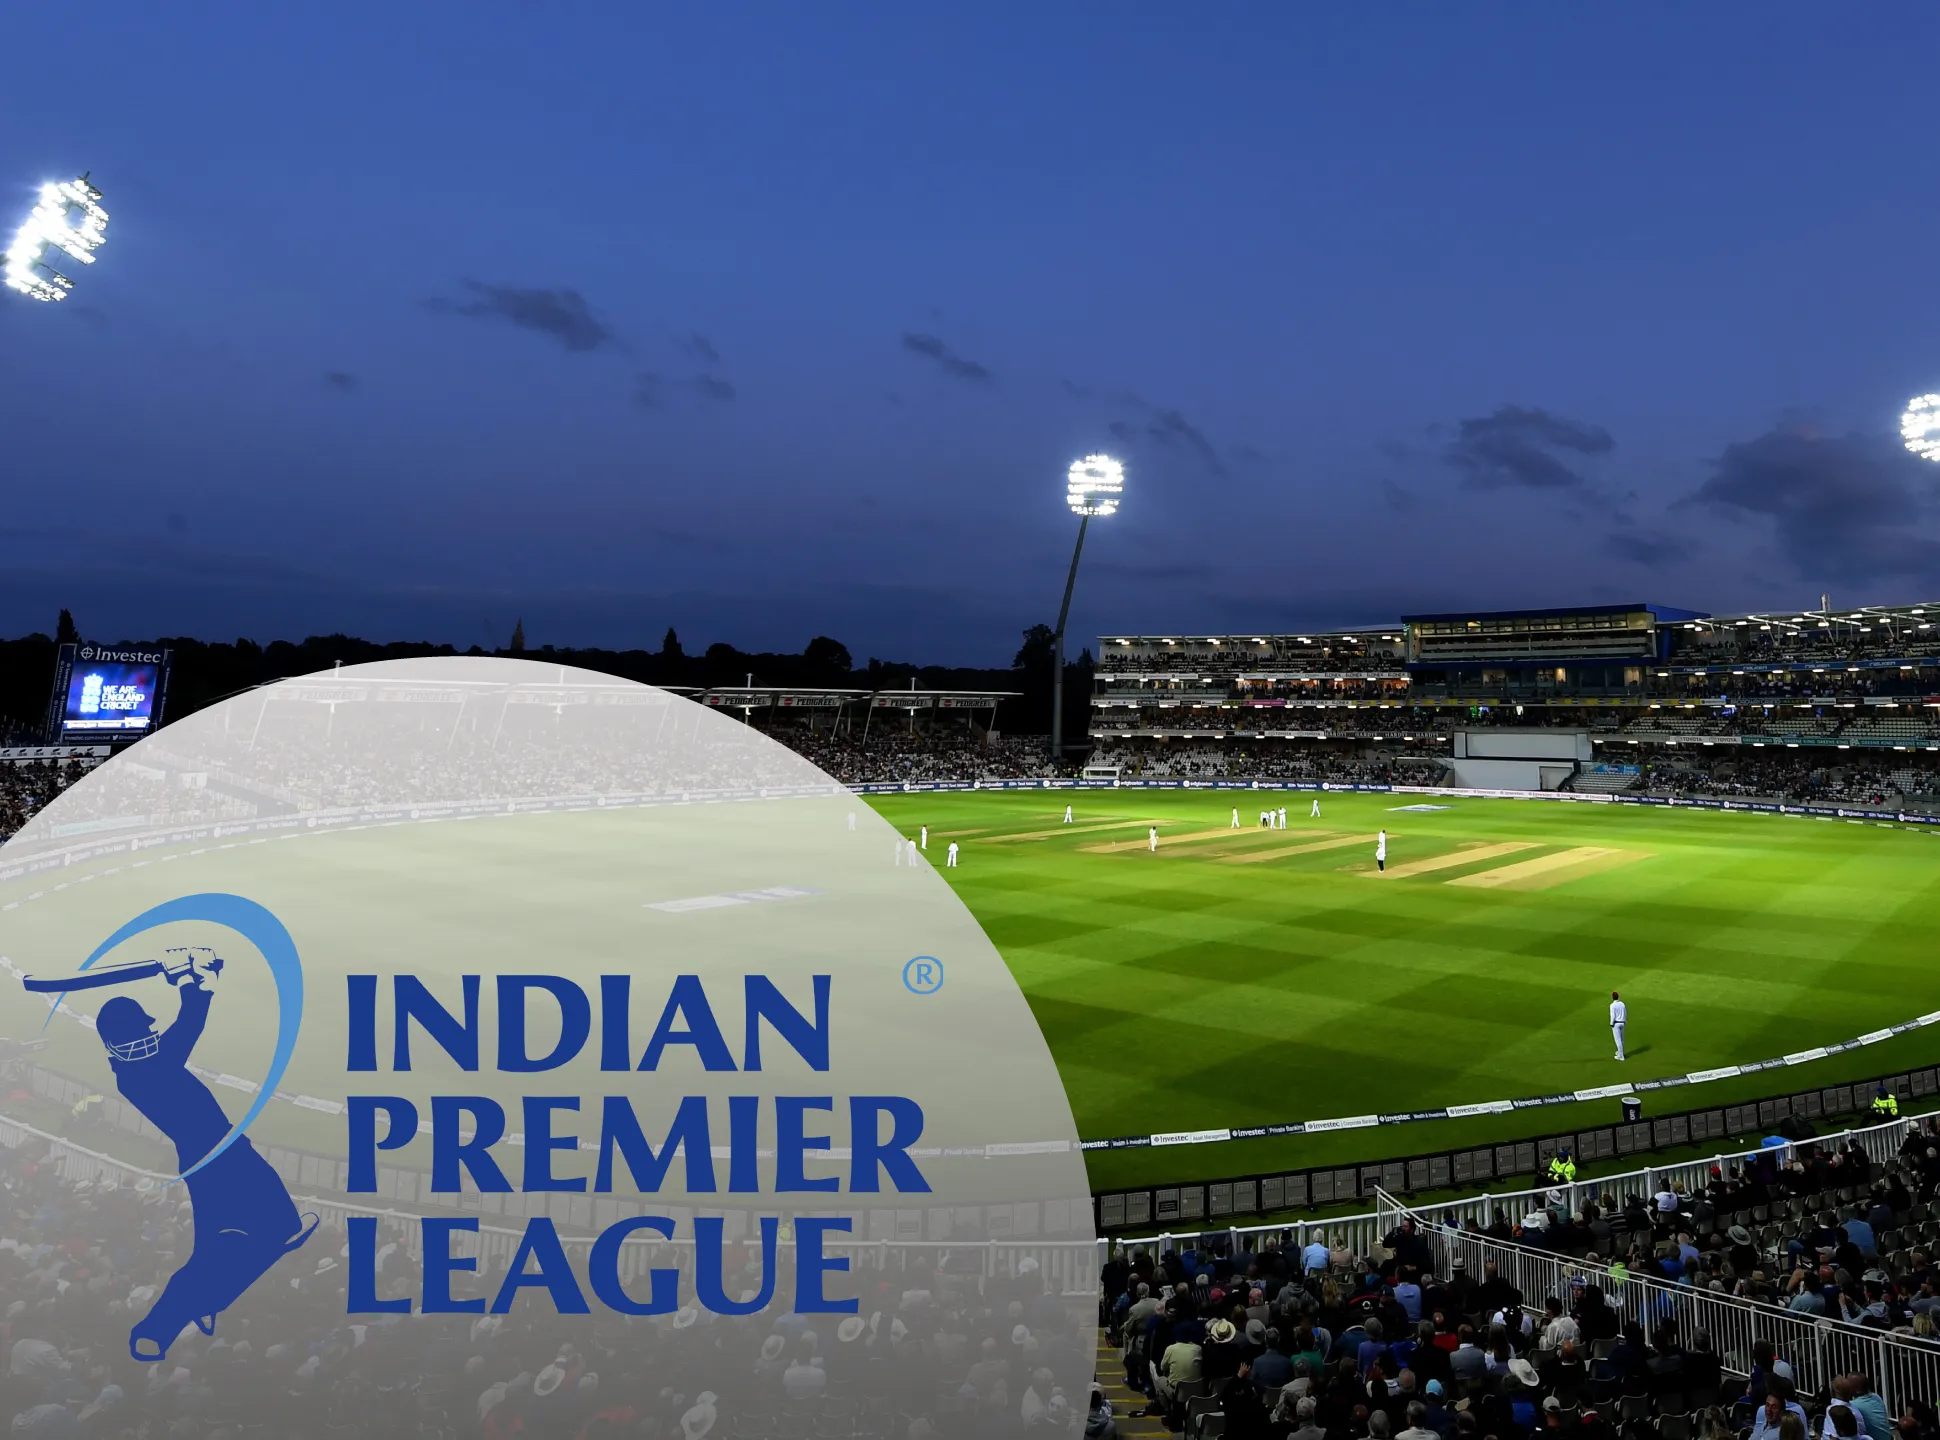 IPL is one of the popular cricket tournaments that you can bet on.